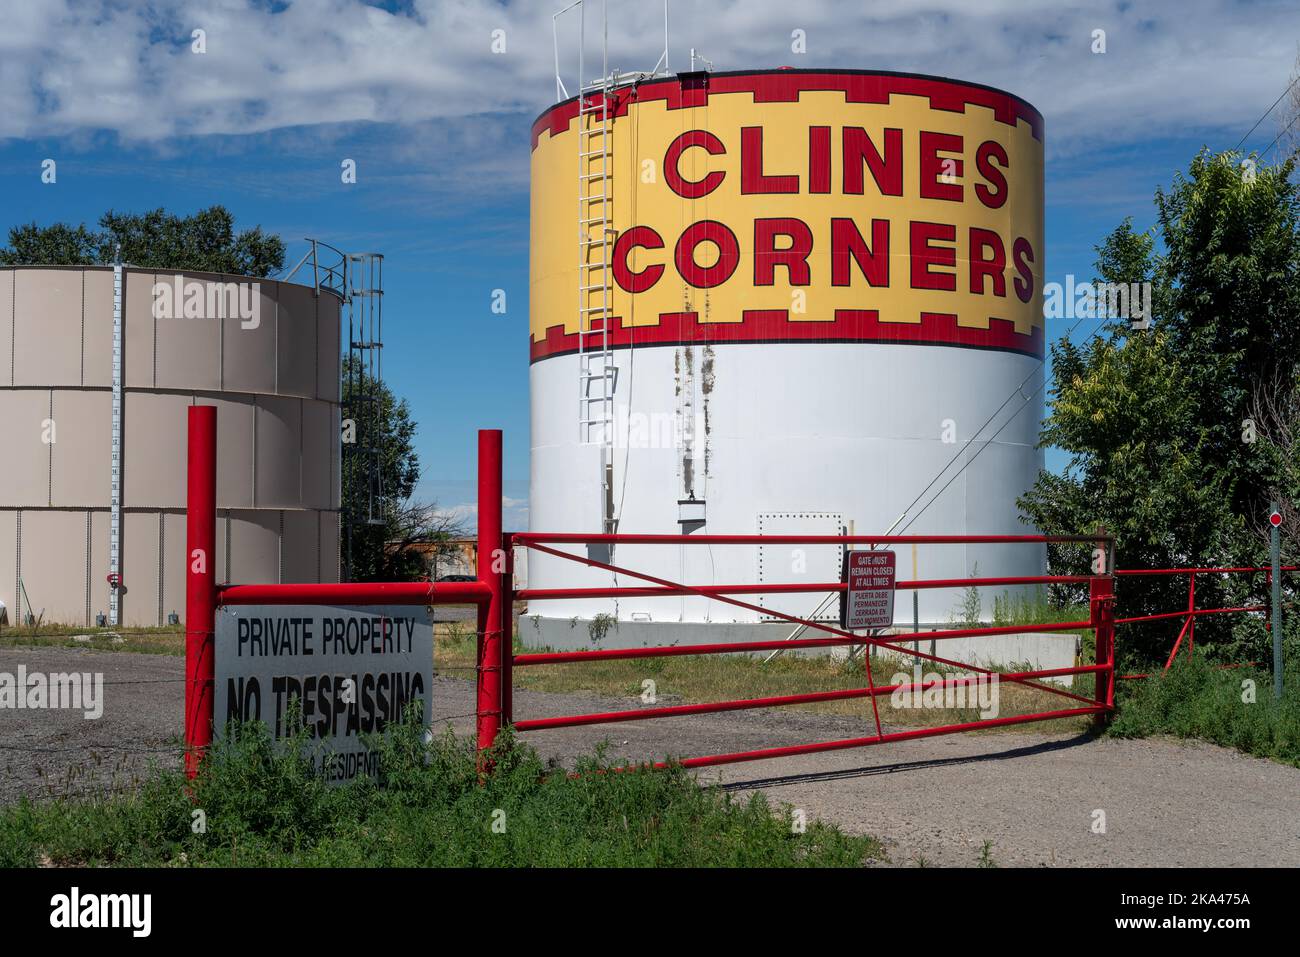 A large tank, the upper half painted with red and yellow with the words Cline Corners in large block letters, Clines Corners, New Mexico. Stock Photo